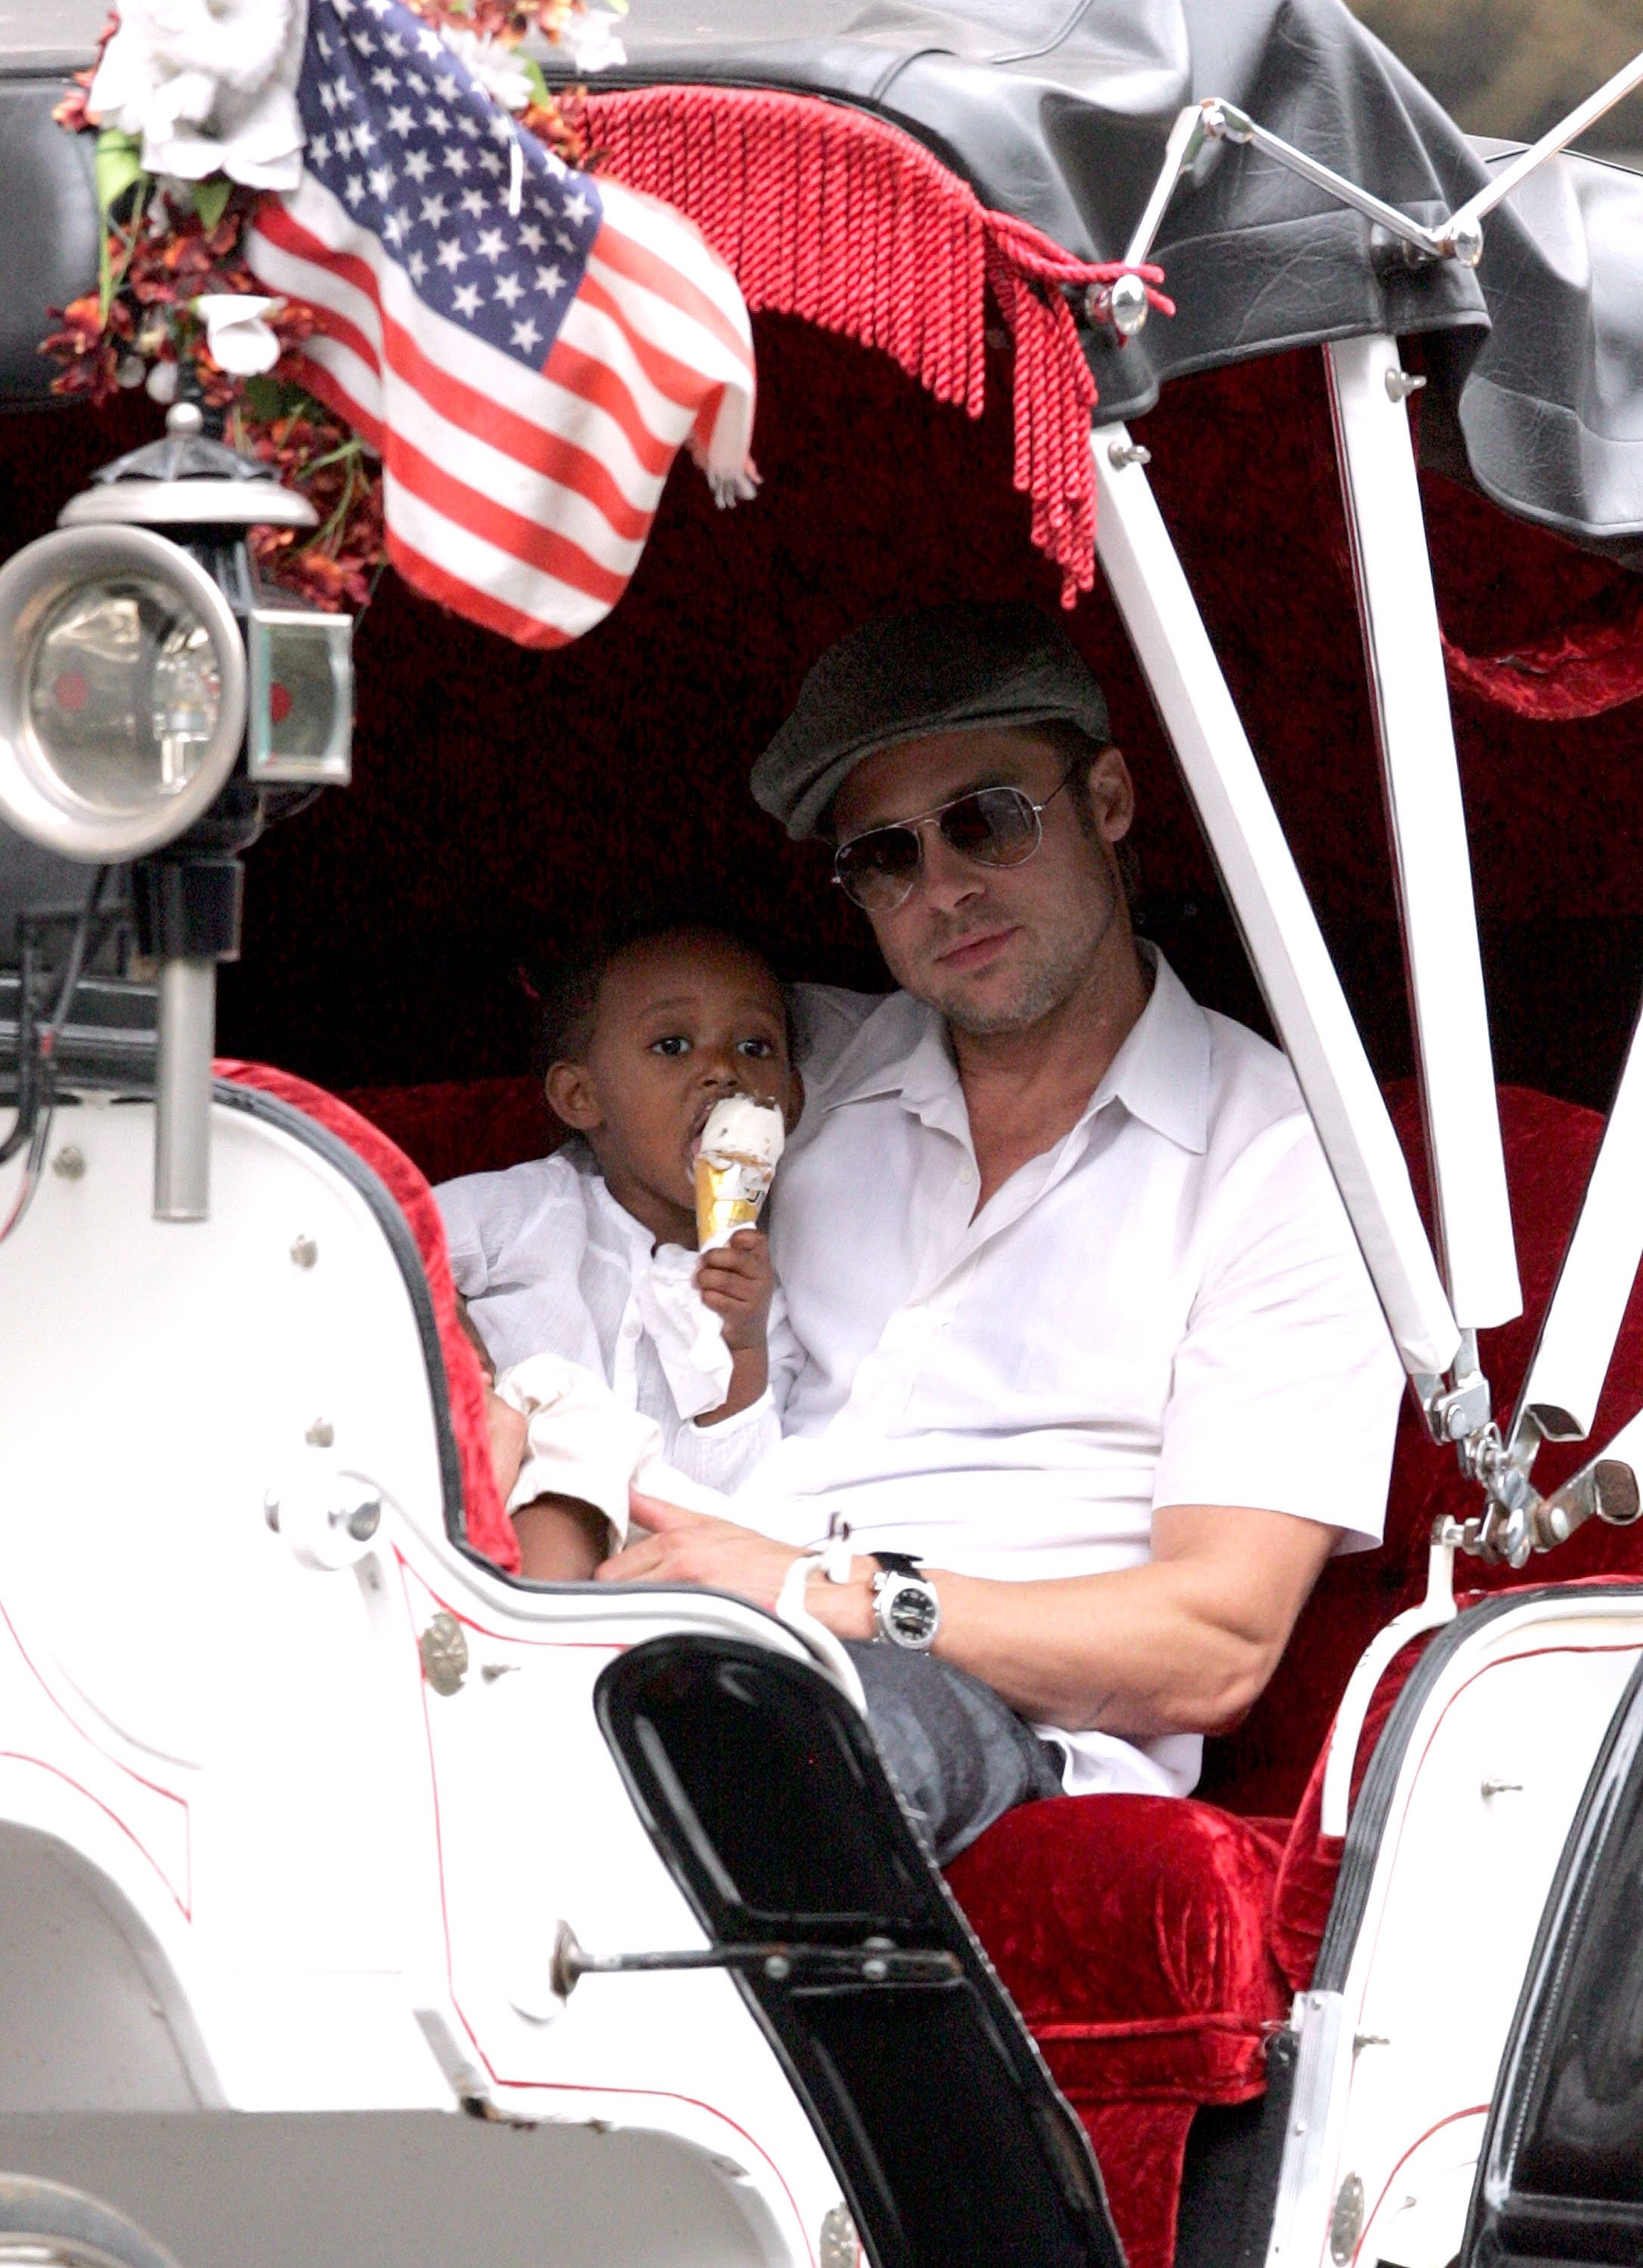 Brad Pitt with his daughter Zahara in New York 2007. | Source: Getty Images